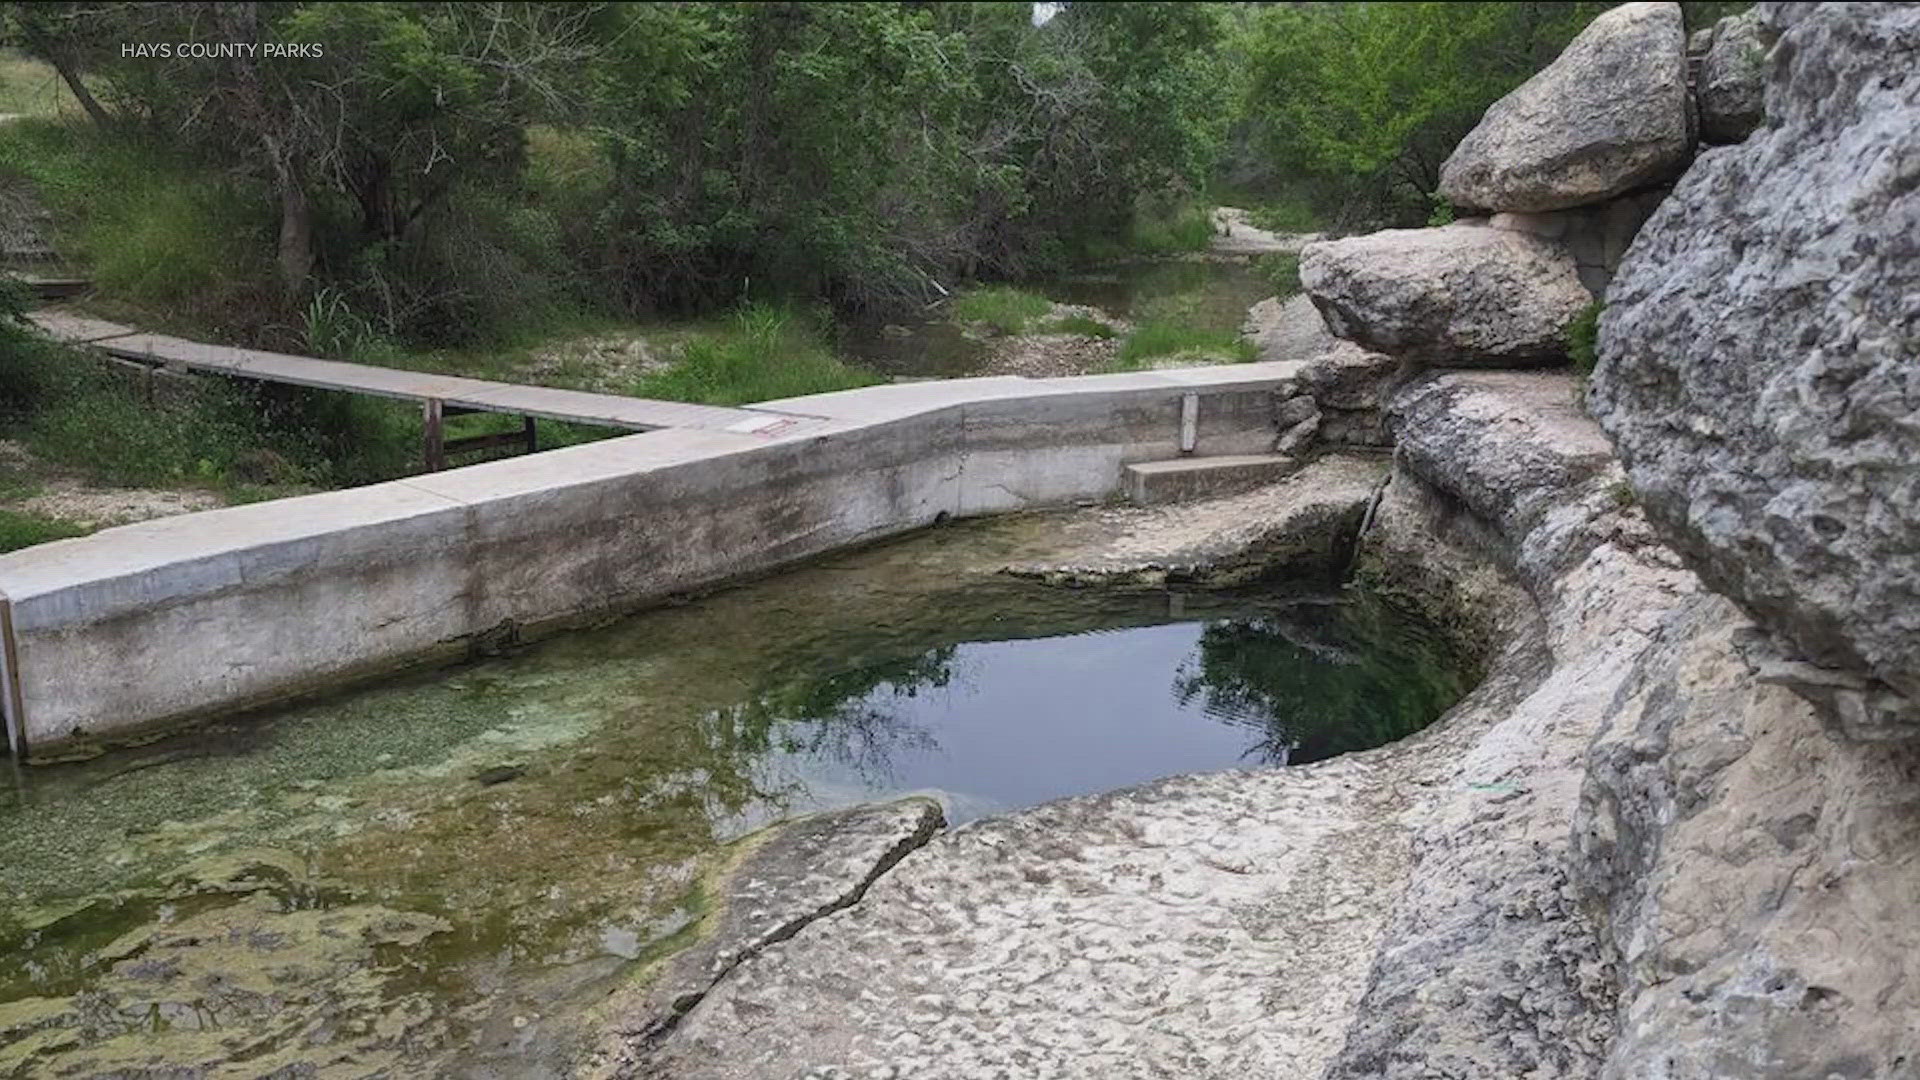 The move comes as water levels at the well are extremely low.